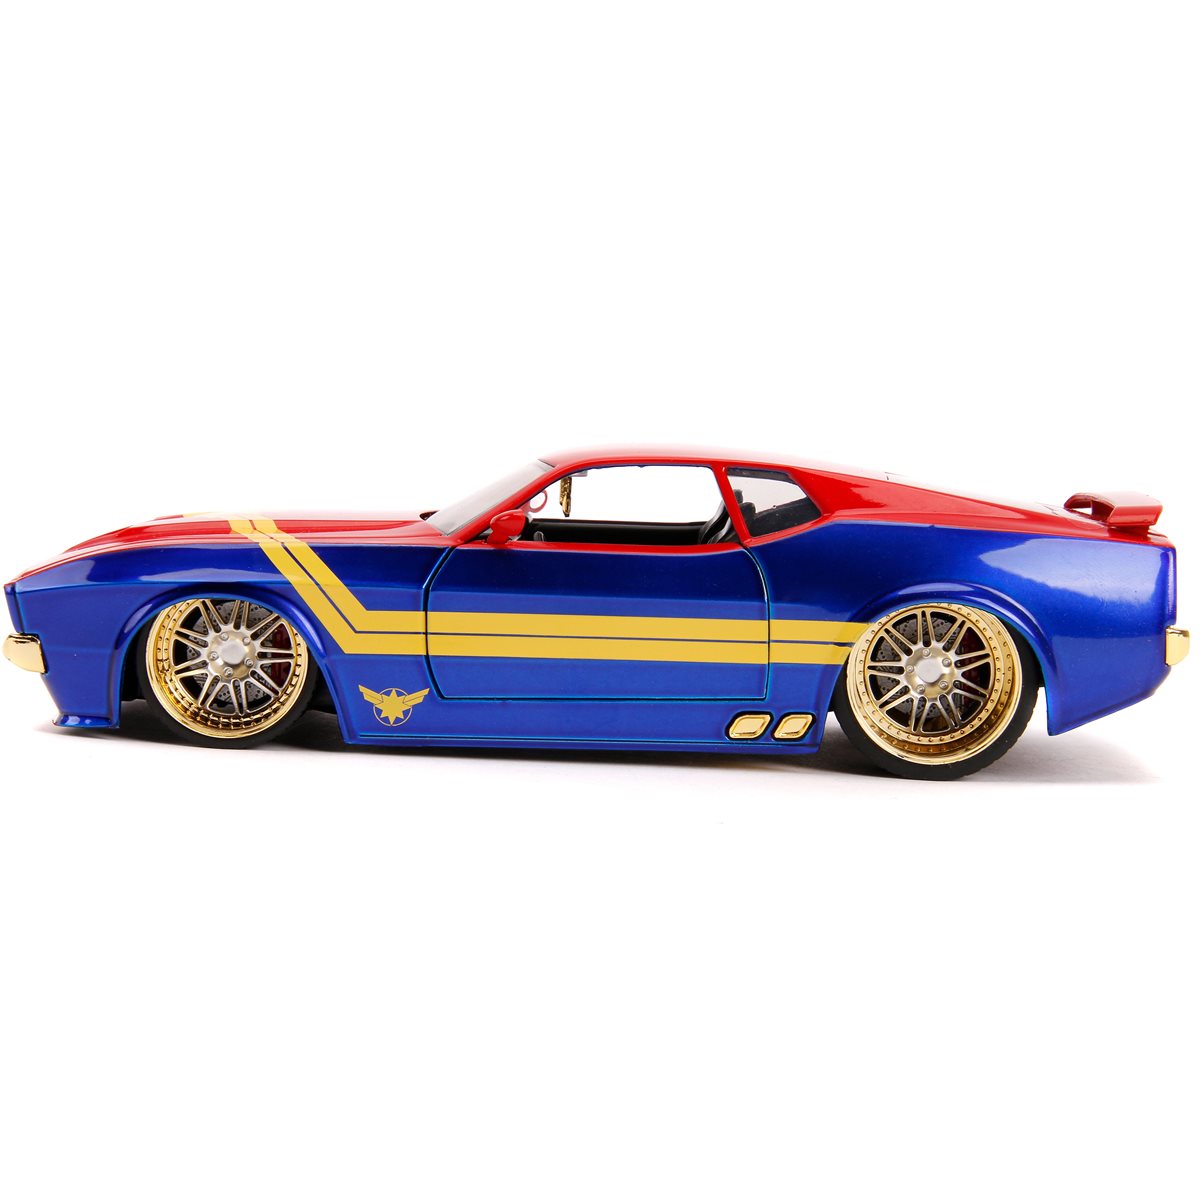 Captain Marvel 1973 Ford Mustang Mach 1 Avengers 1:24 Scale Die 